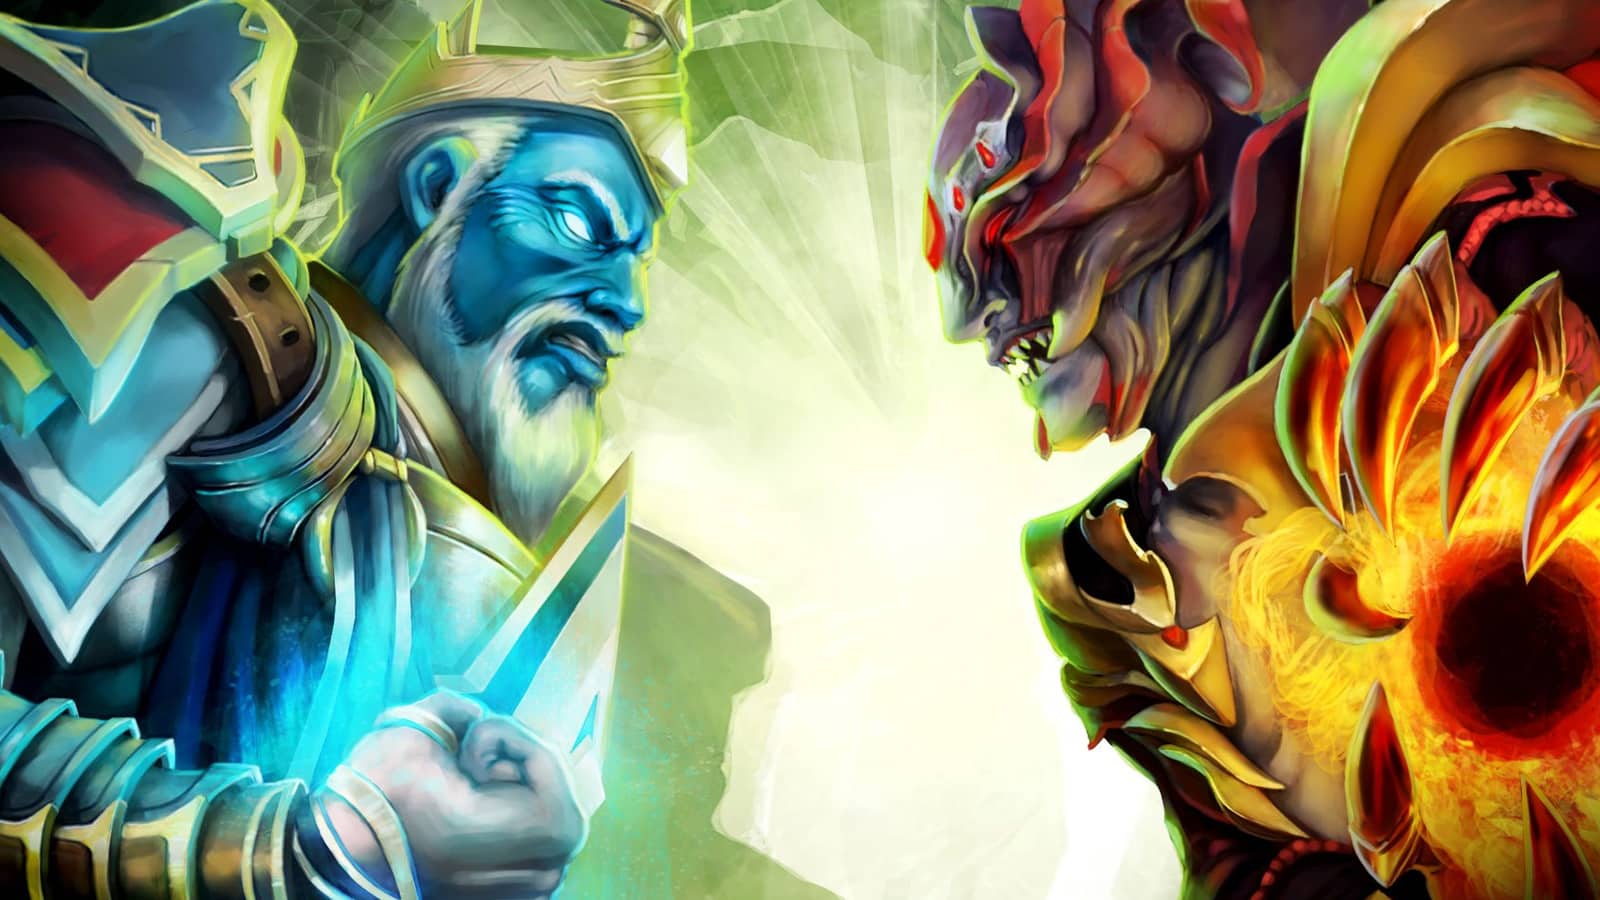 Runescape key art showing two magical characters